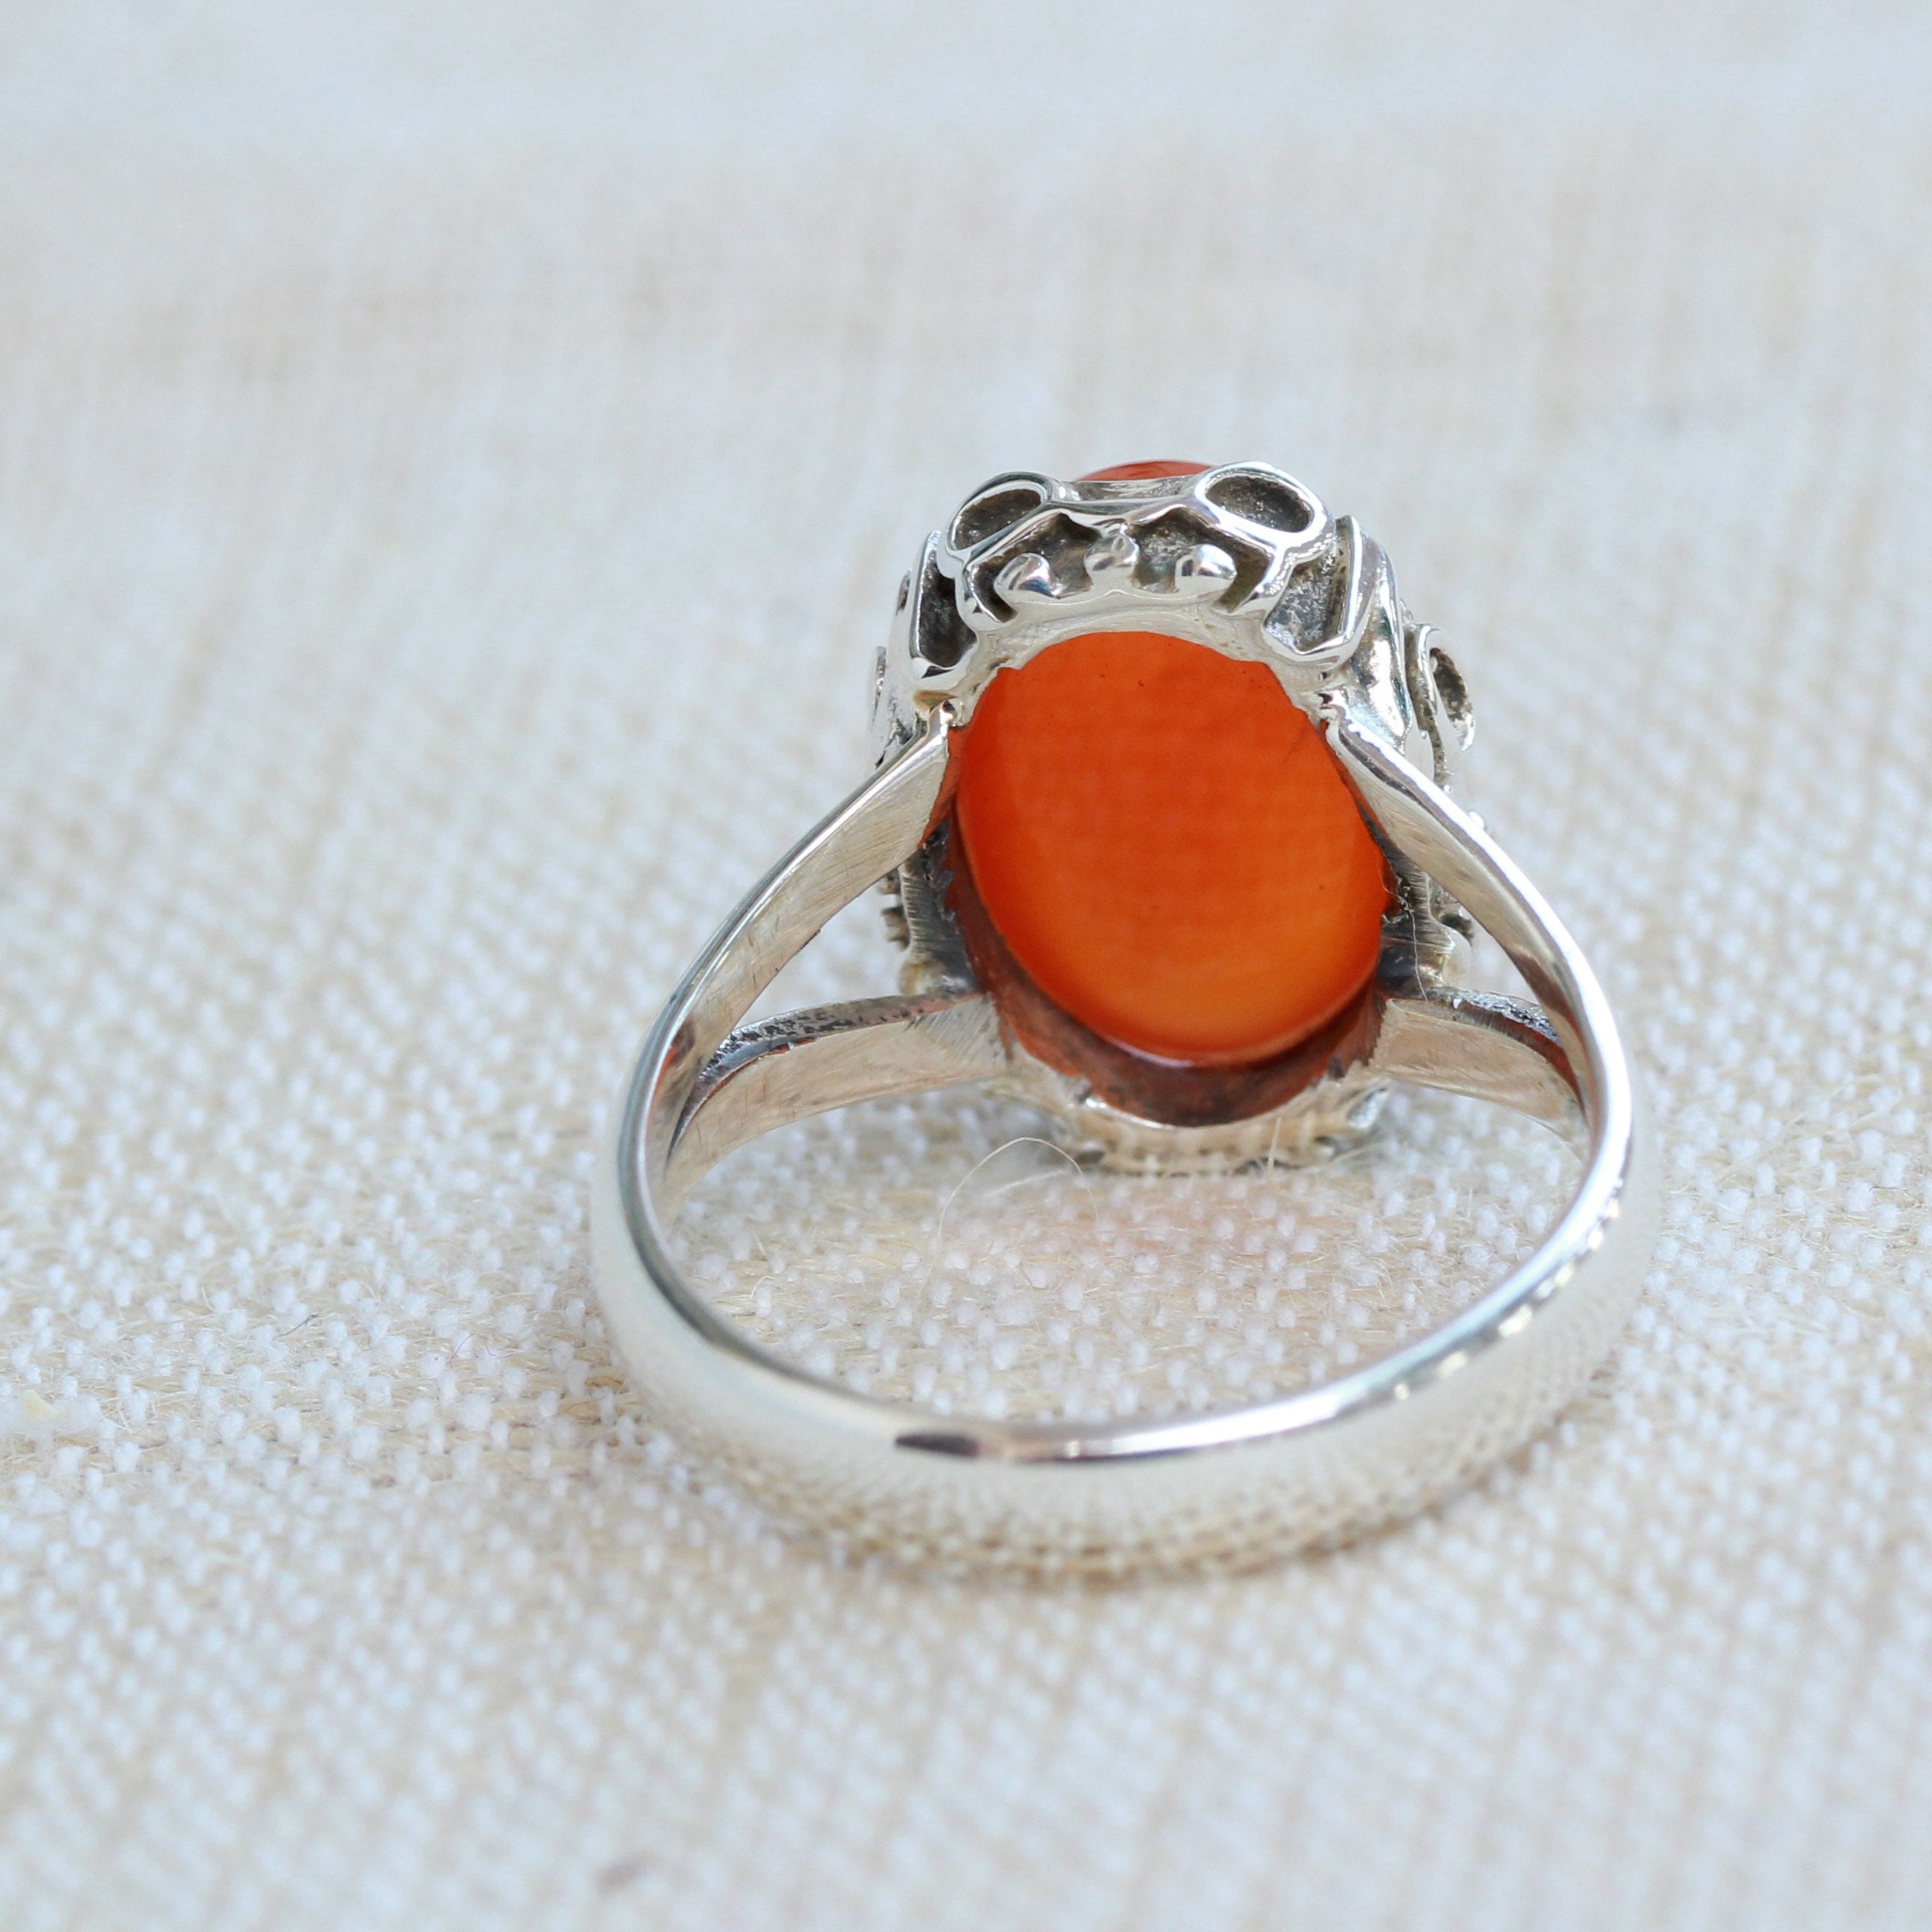 Carnelian Ring, 925 Sterling Silver Jewelry, Gift for Her, Natural